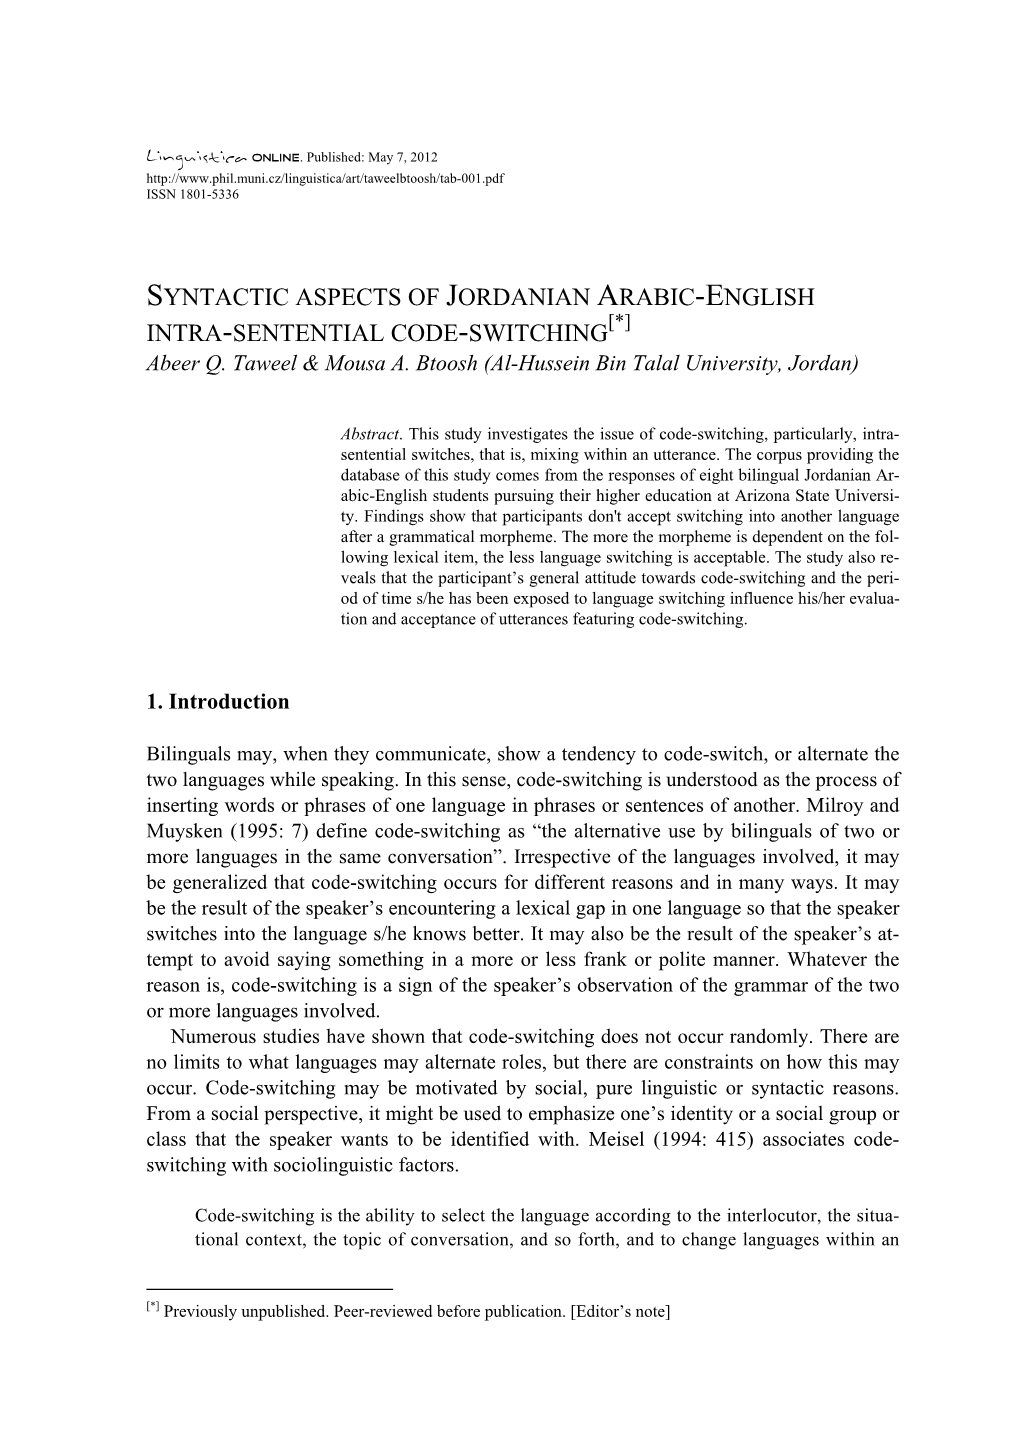 SYNTACTIC ASPECTS of JORDANIAN ARABIC-ENGLISH INTRA-SENTENTIAL CODE-SWITCHING[*] Abeer Q